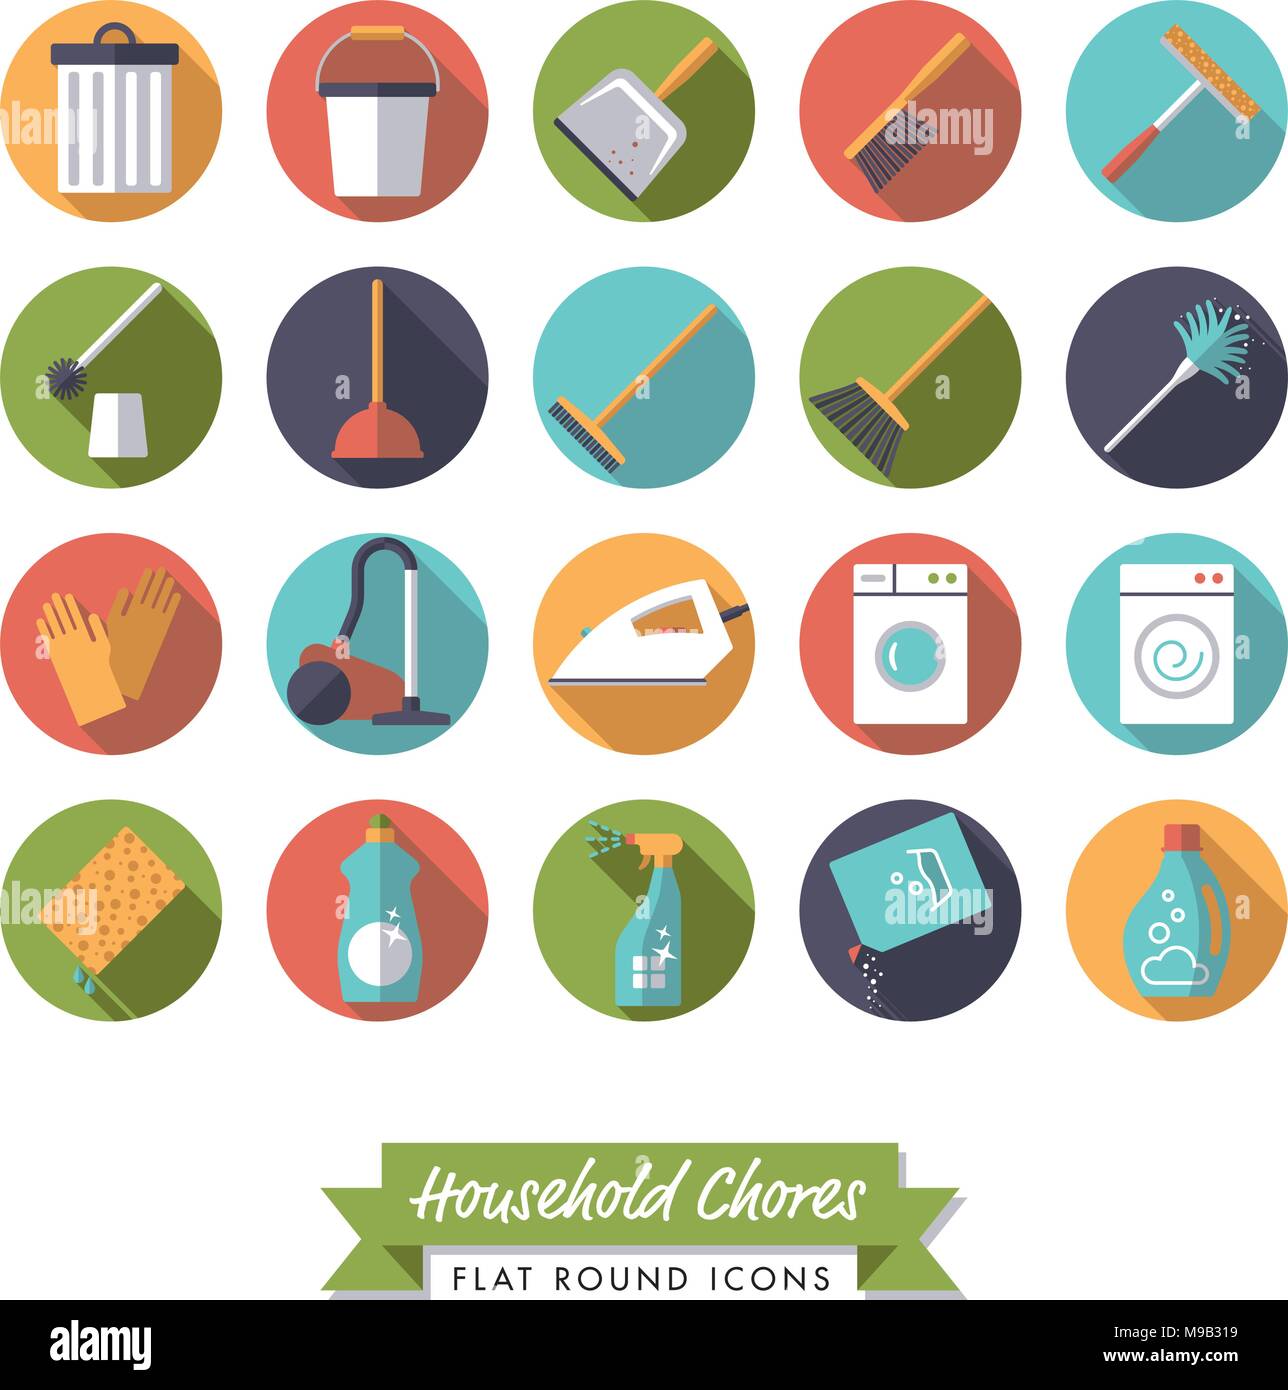 Collection of 20 flat design long shadow household chores icons on white background Stock Vector